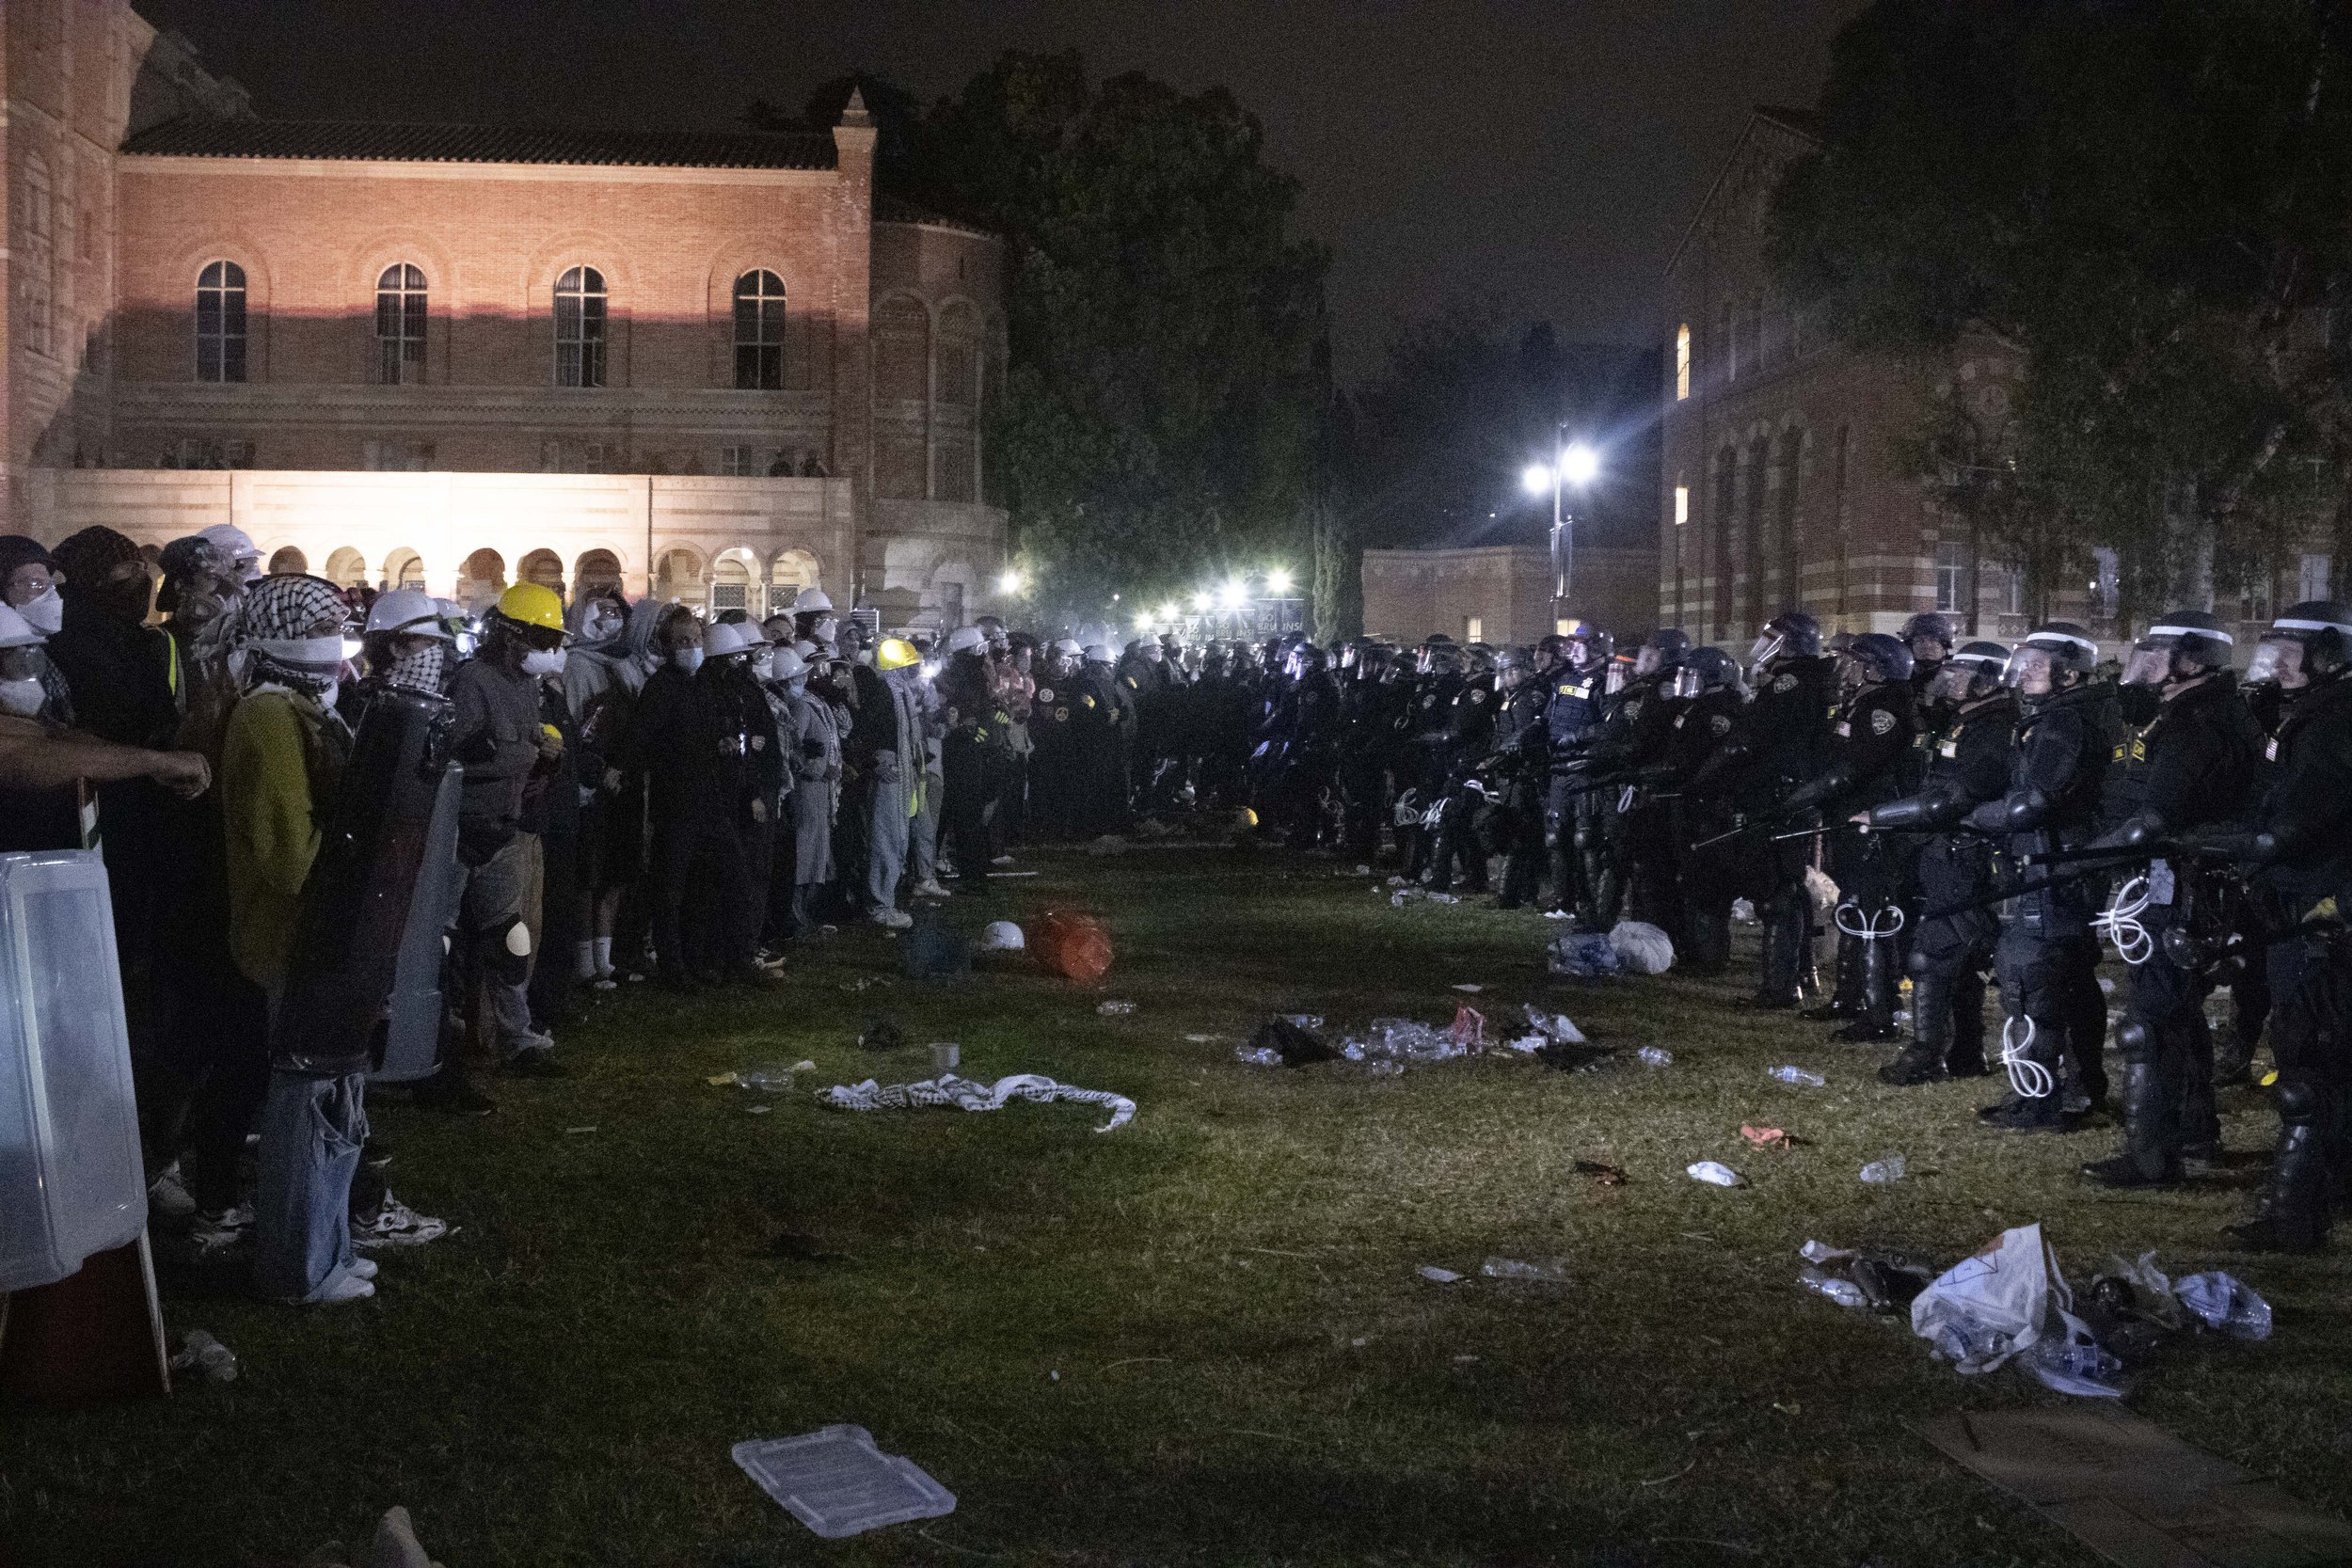  California Highway Patrol (CHP) officers confront protesters after tearing down one of the main barricades to the encampment at University of California, Los Angeles supporting Gaza in the Israeli-Palestine Conflict on in Los Angeles, Calif., on Thu